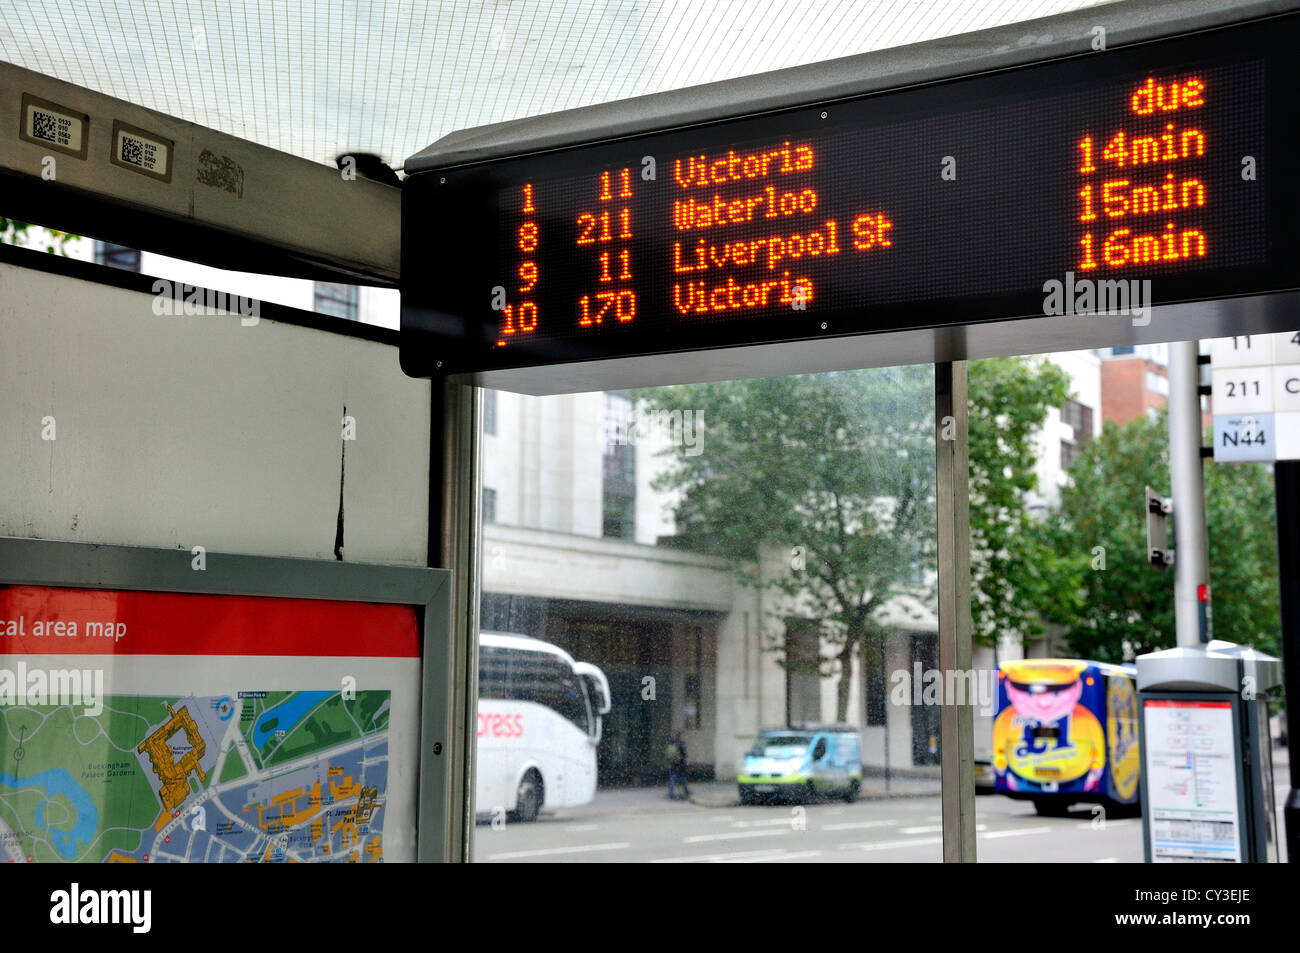 London, England, UK. Bus stop with times of buses due Stock Photo, Royalty Free Image ...1300 x 953